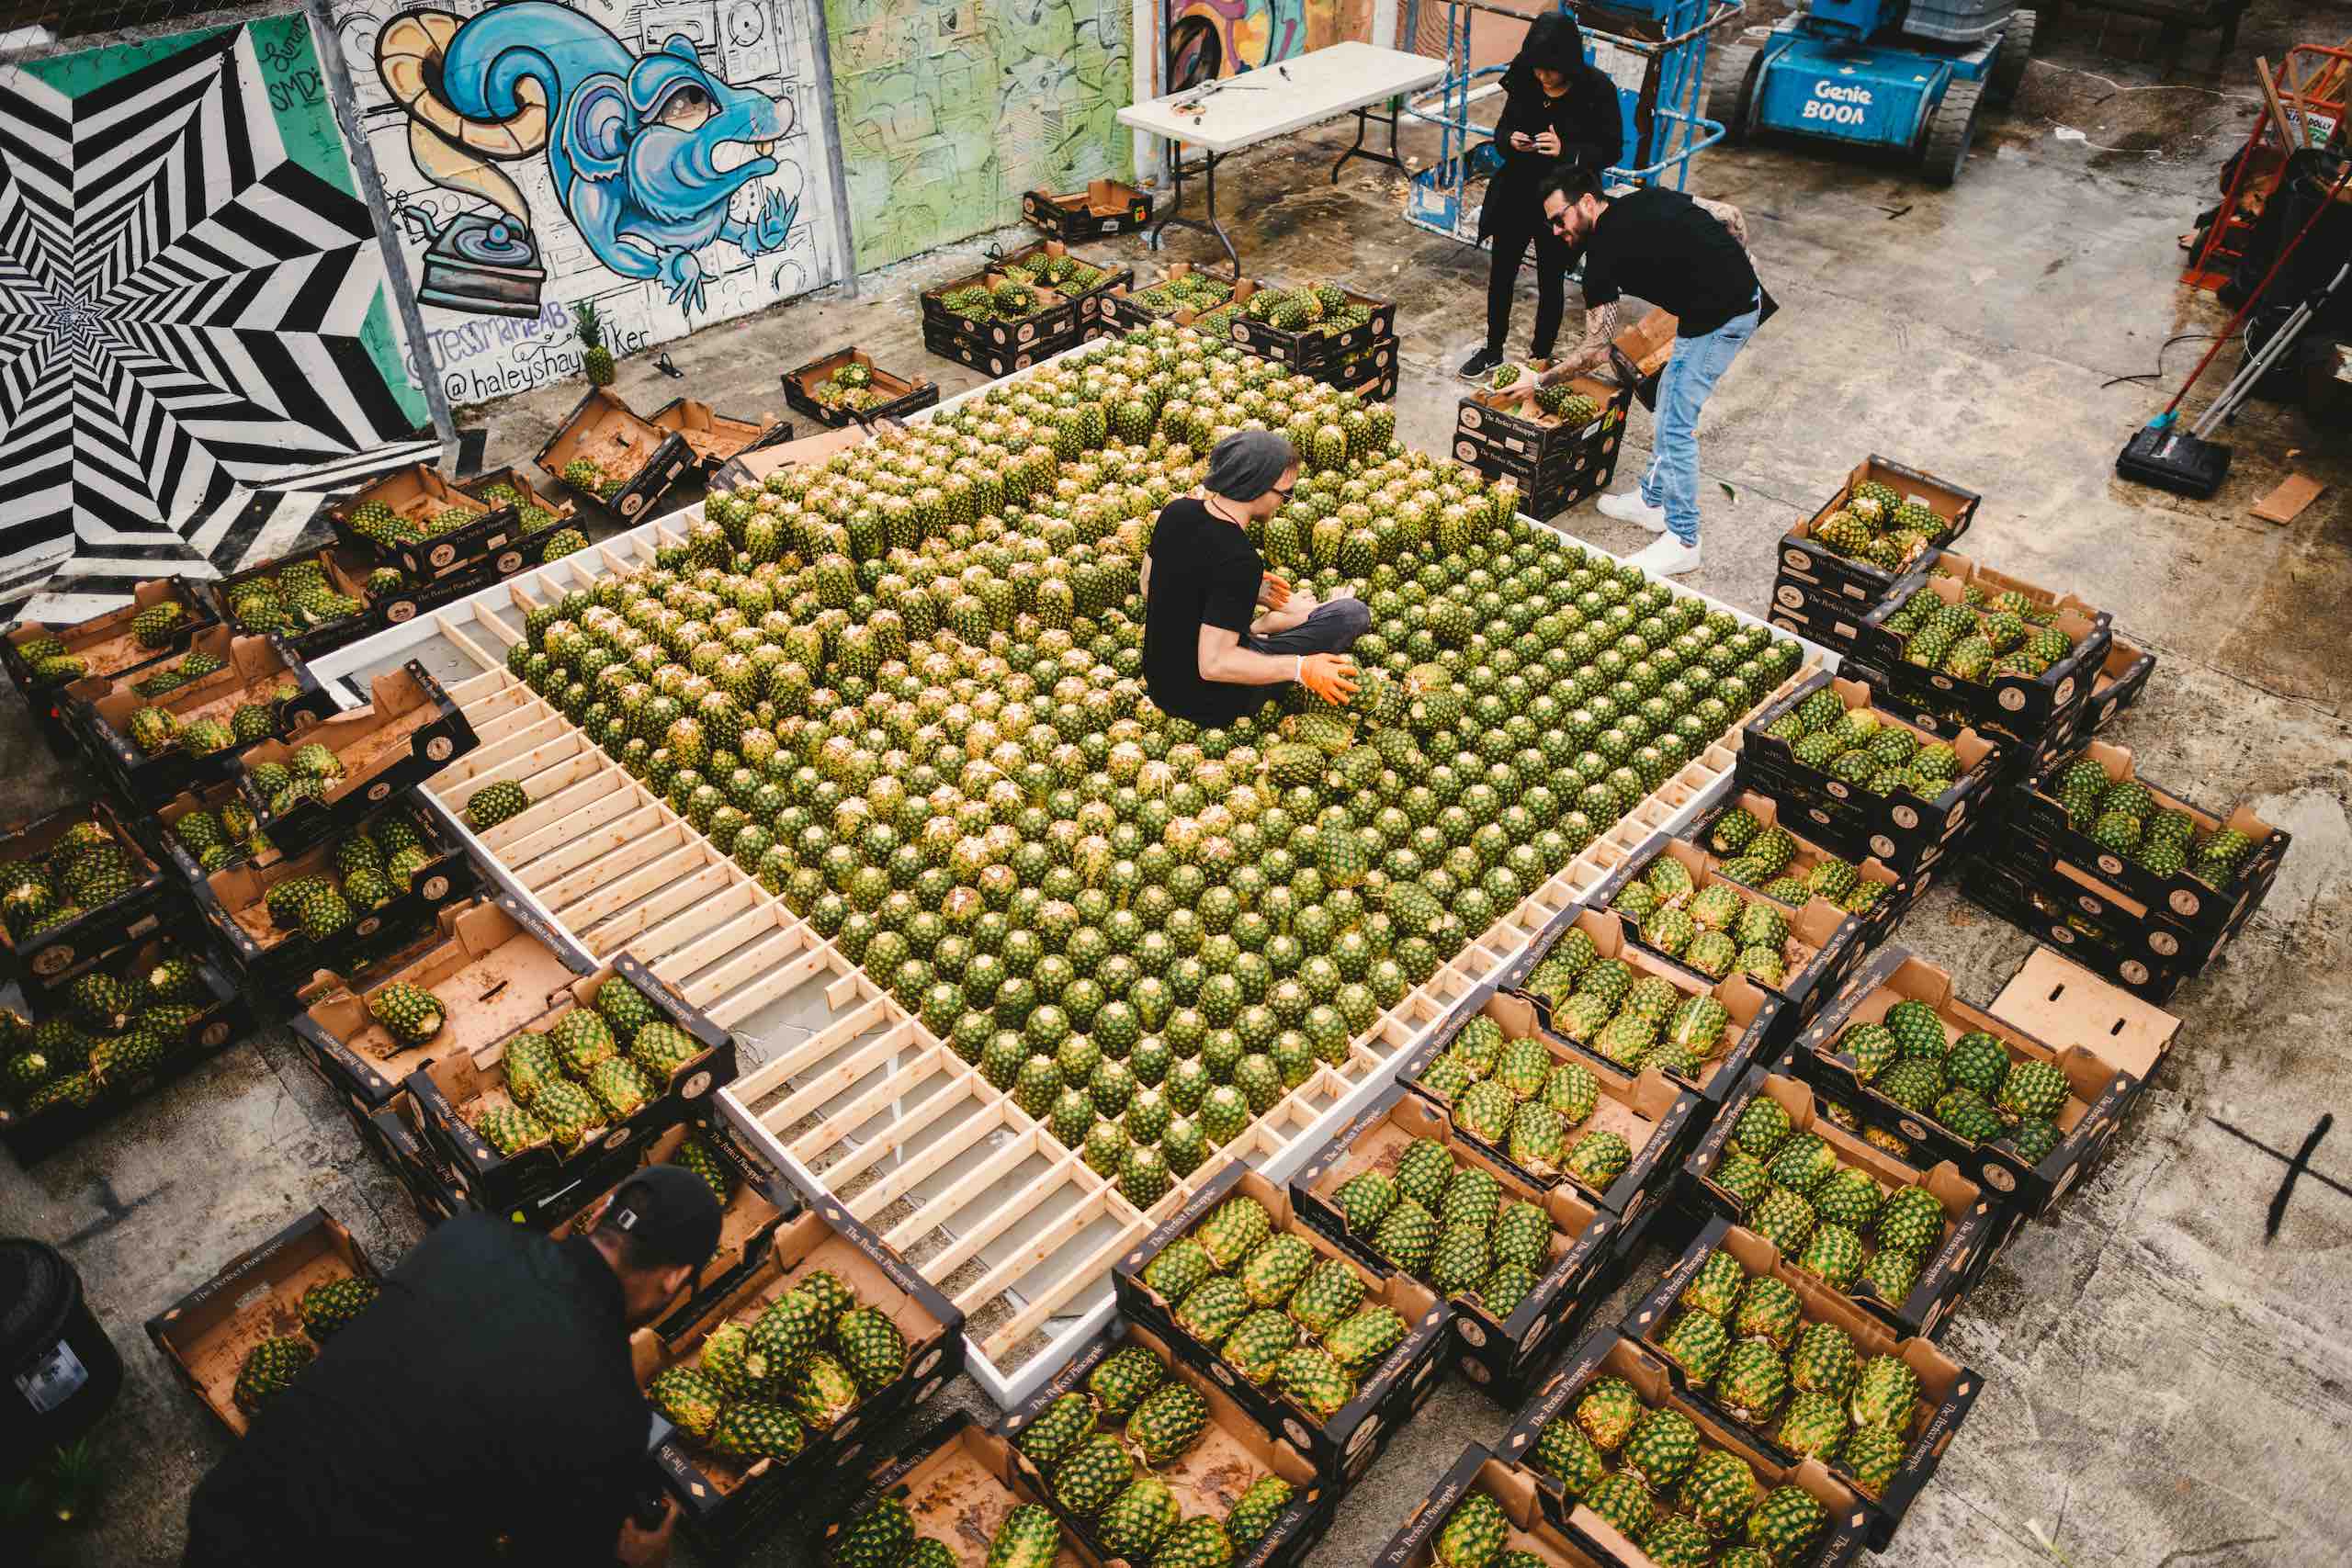 Artwalk 2018 May Pineapple Pyramid Man sitting in the middle of a pile of pineapples building a pyramid formation with many pineapples in boxes all around it as well as a few other people working with pineapples in the boxes